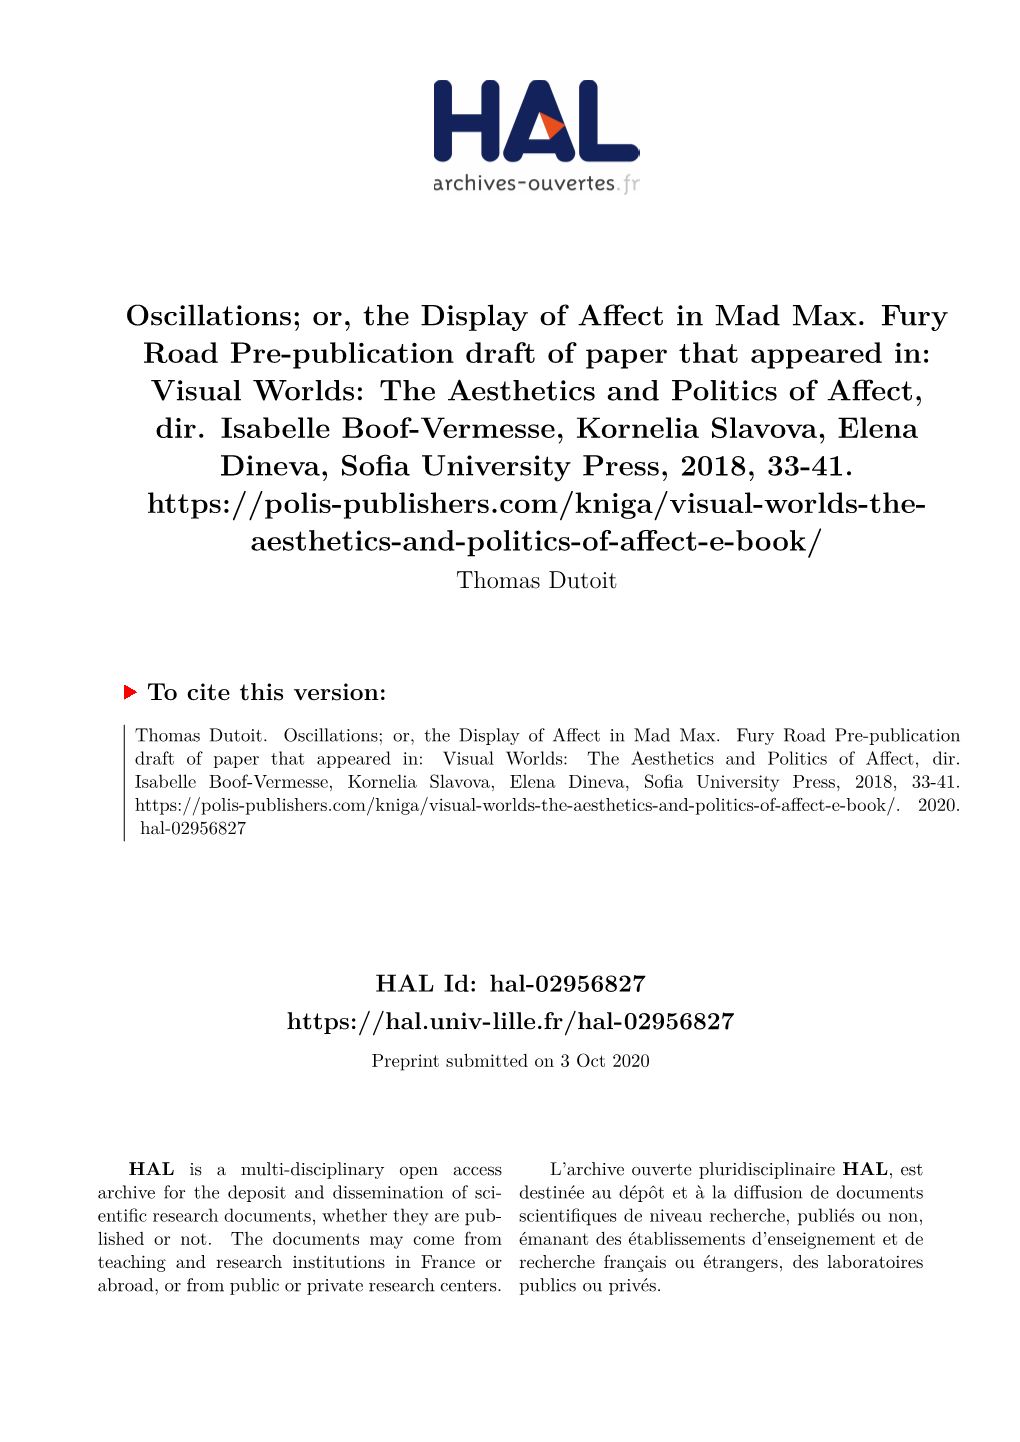 Fury Road Pre-Publication Draft of Paper That Appeared In: Visual Worlds: the Aesthetics and Politics of Affect, Dir